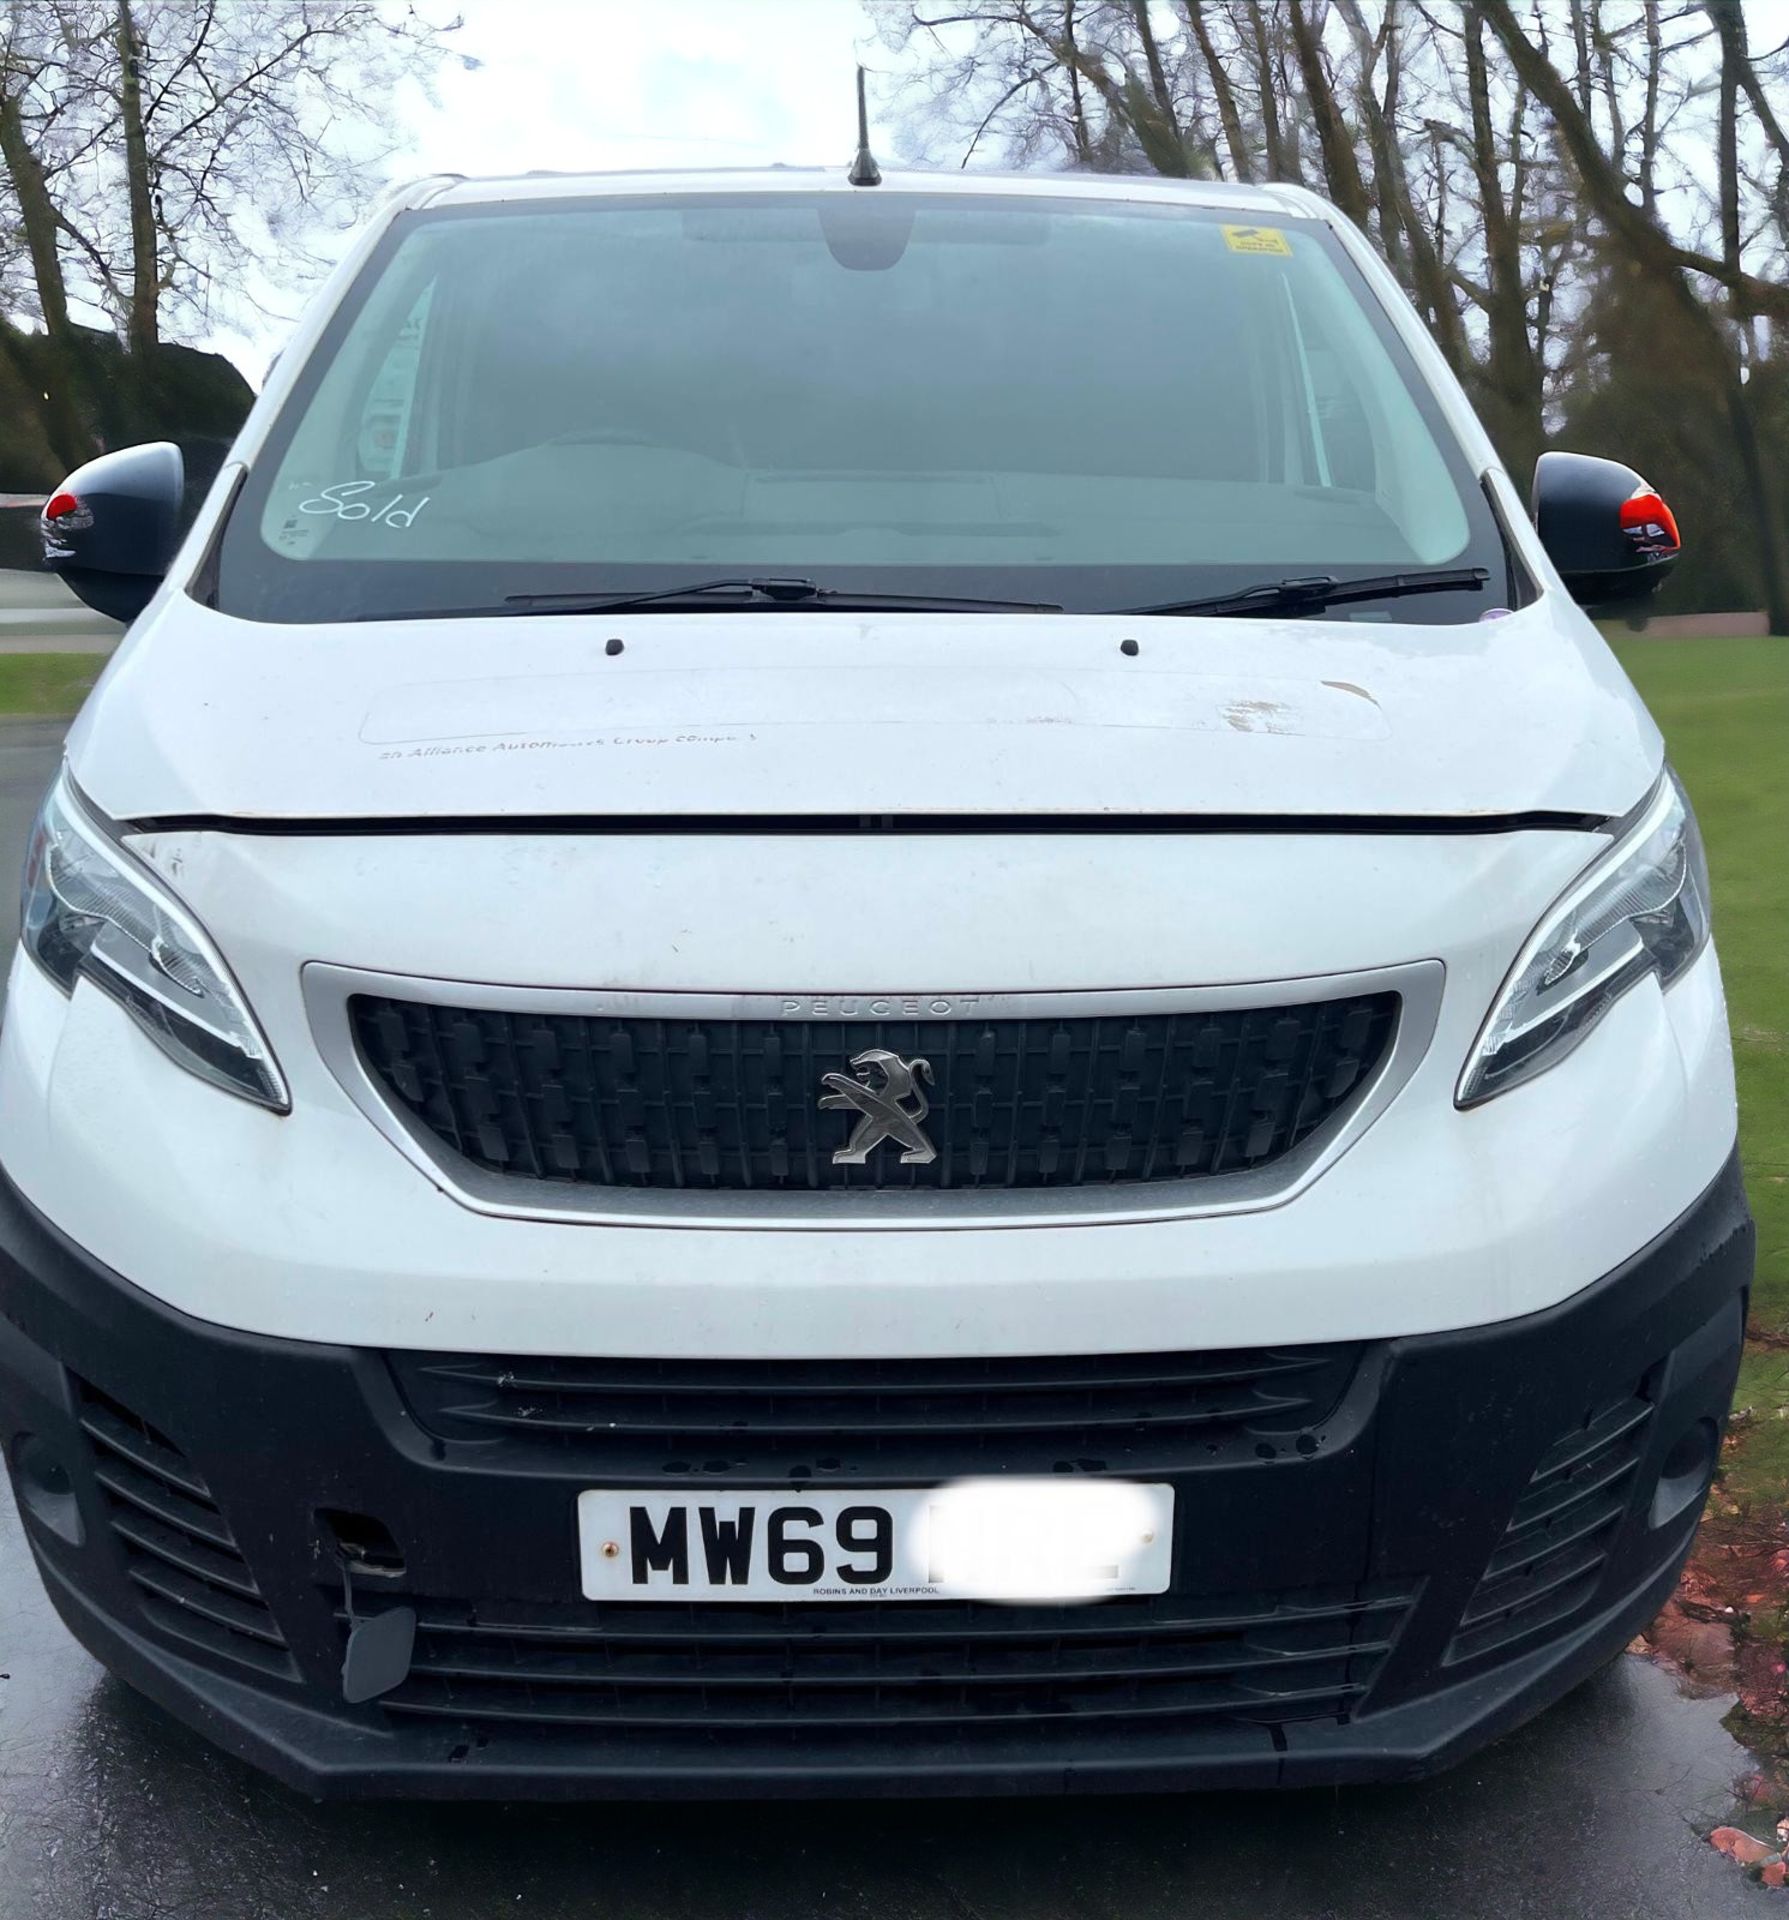 2019 PEUGEOT EXPERT PROFESSIONAL - SPACIOUS AND FEATURE-RICH FLEET VAN **SPARES OR REPAIRS** - Image 2 of 13